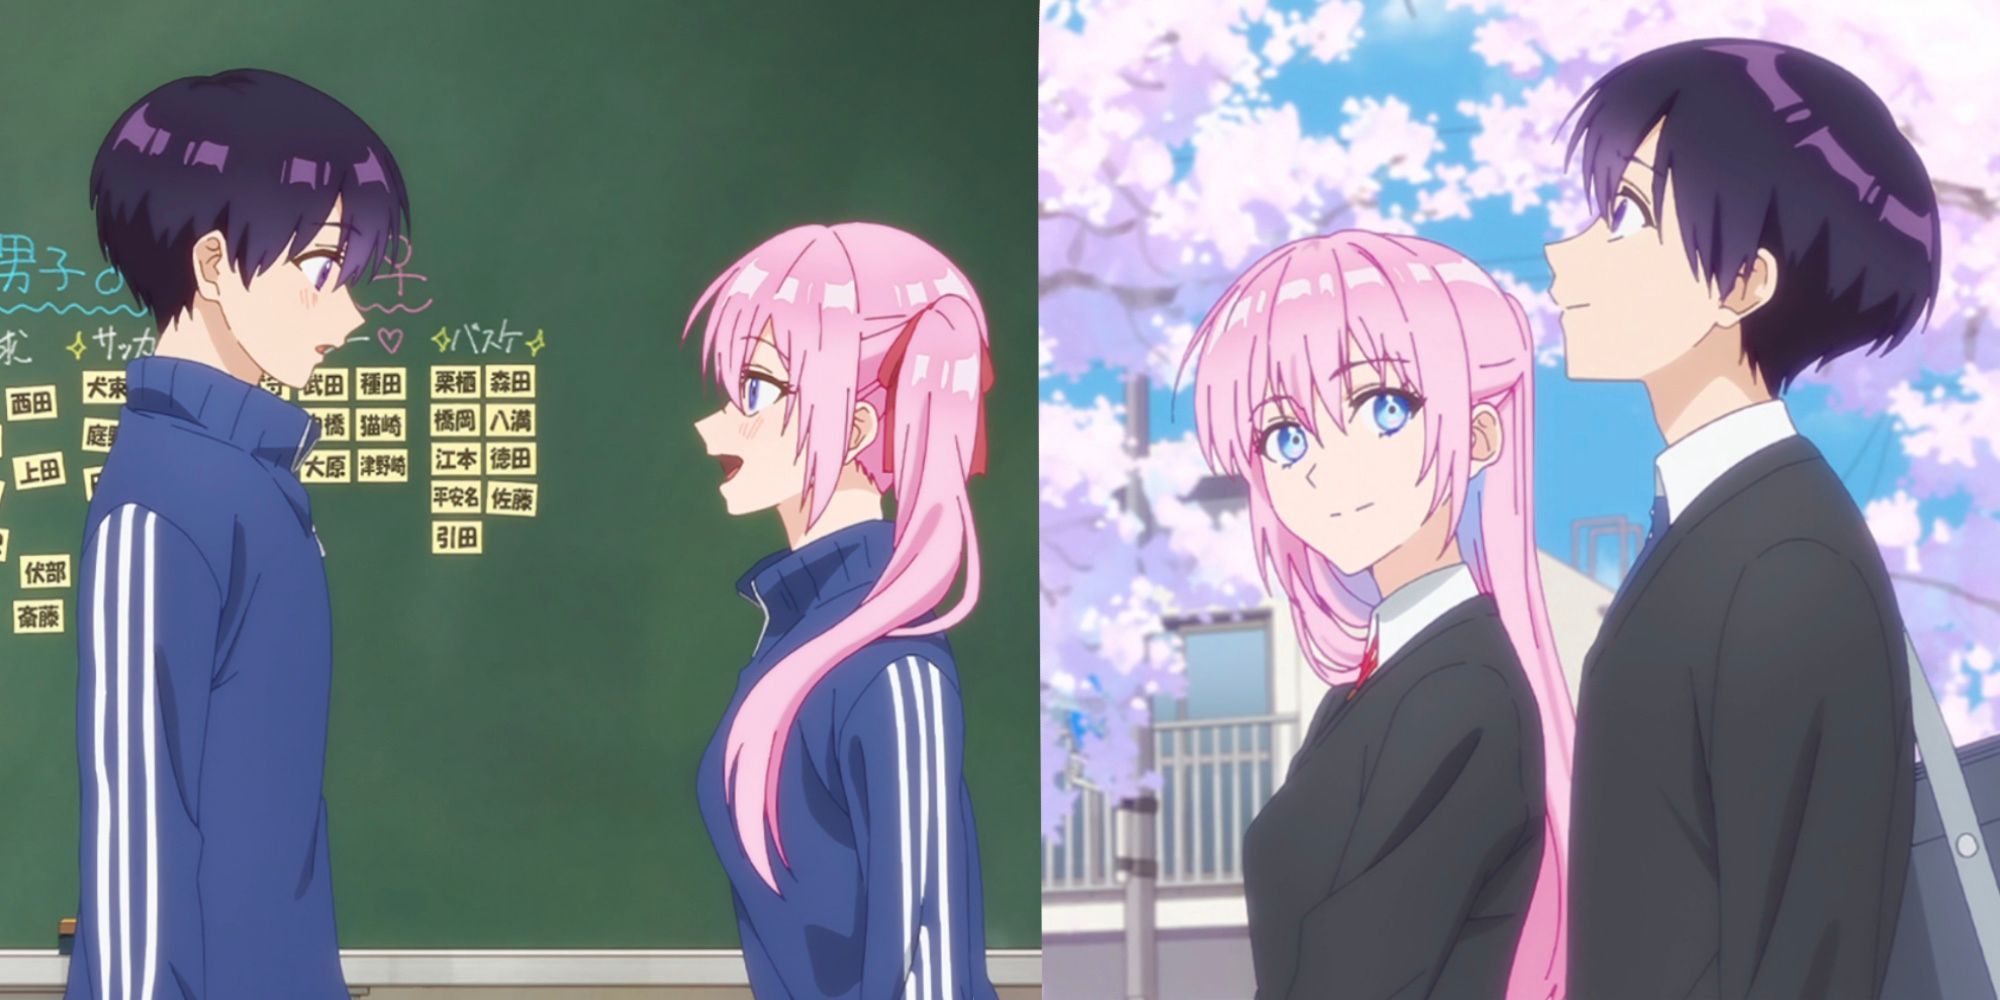 split image featuring two characters, shikimori and izumi talking to each other